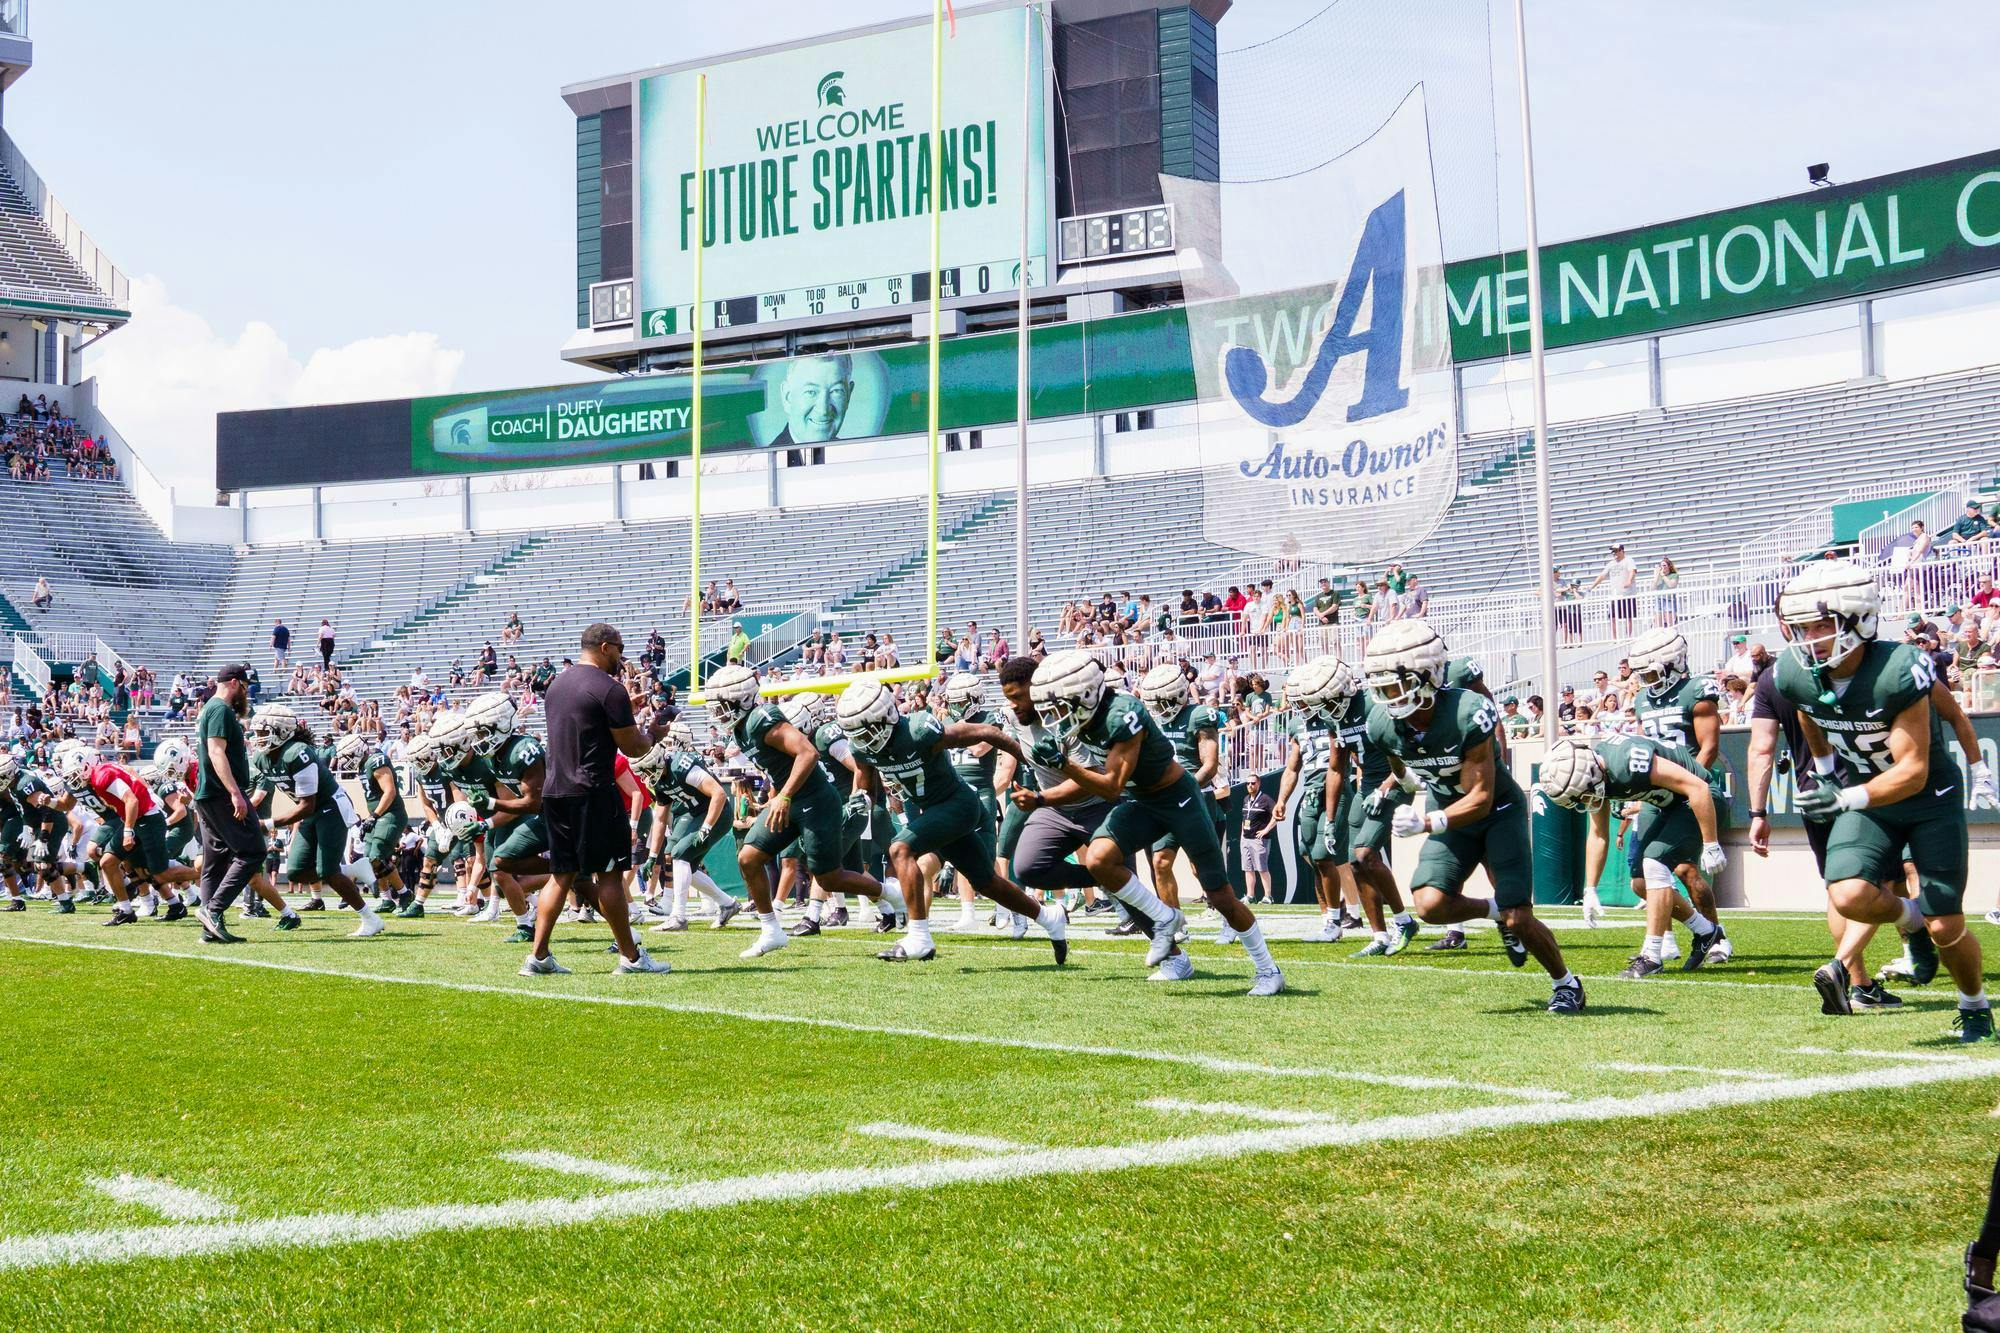 The MSU football team warms up before their spring open practice, held at Spartan Stadium on April 15, 2023.